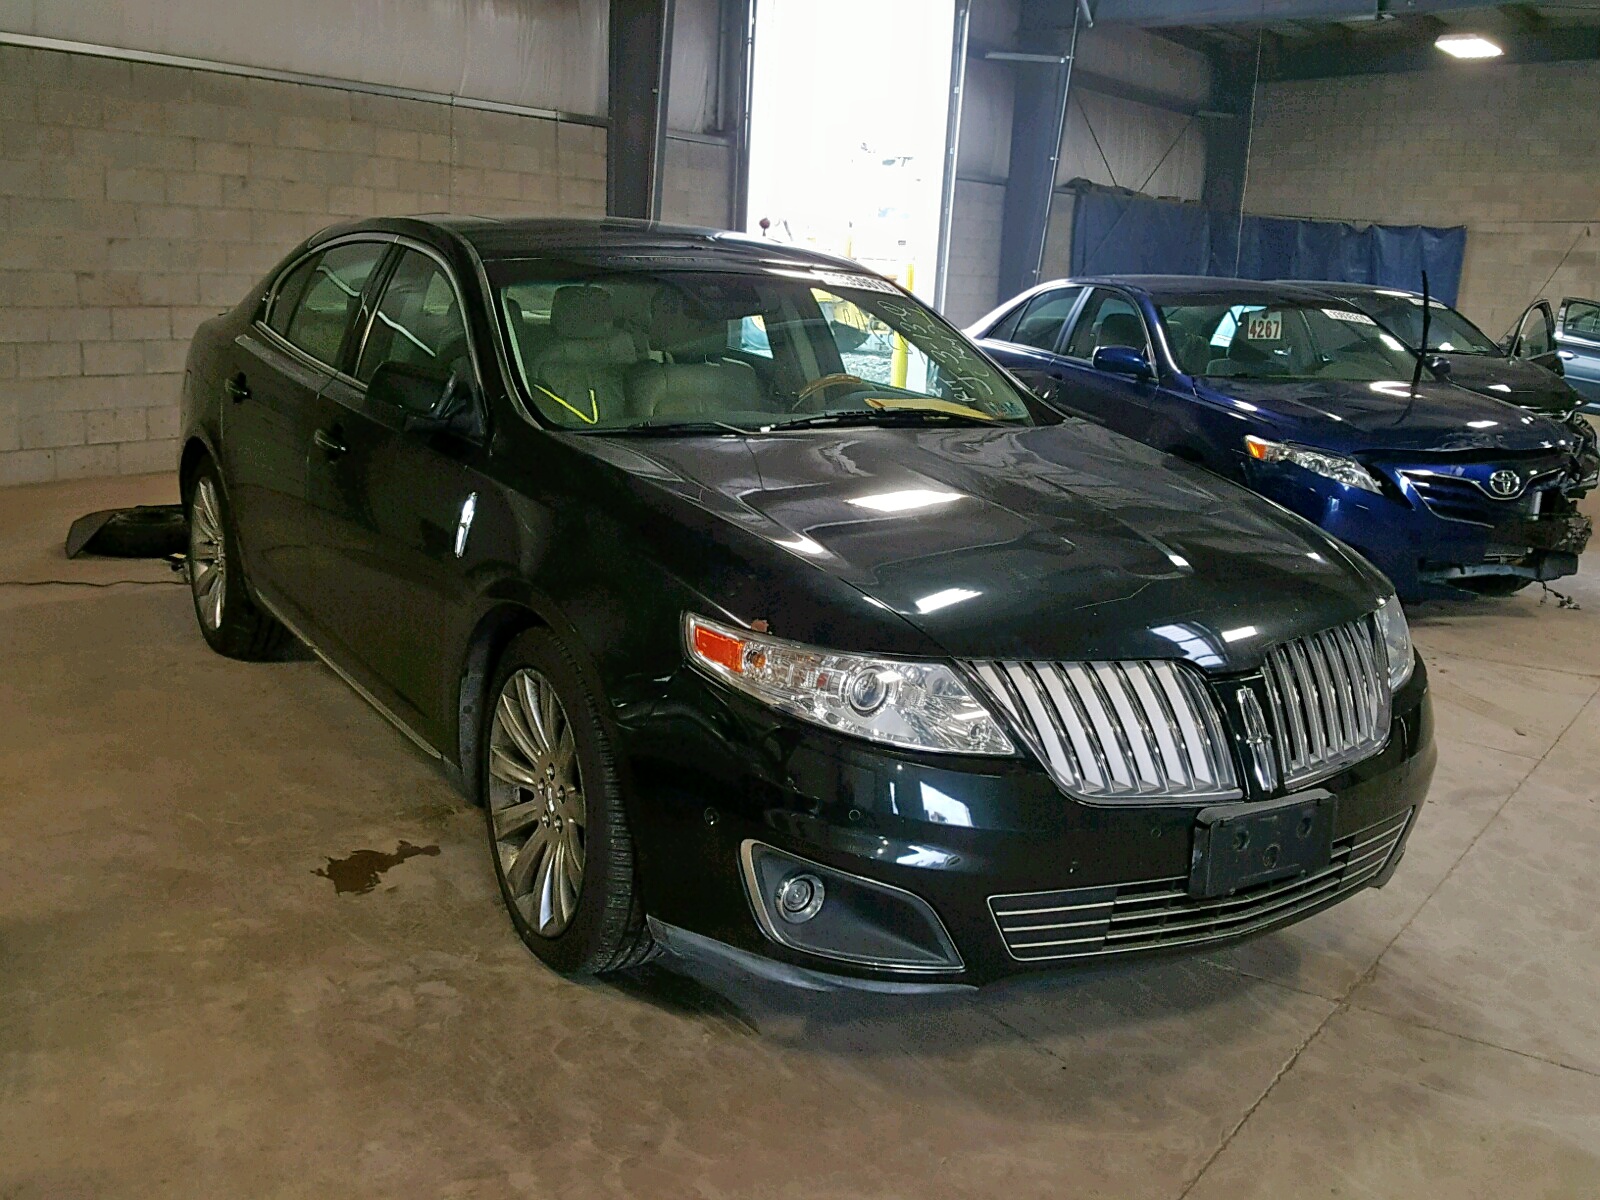 2010 Lincoln MKS for sale at Copart Chalfont, PA Lot #30359*** |  SalvageReseller.com